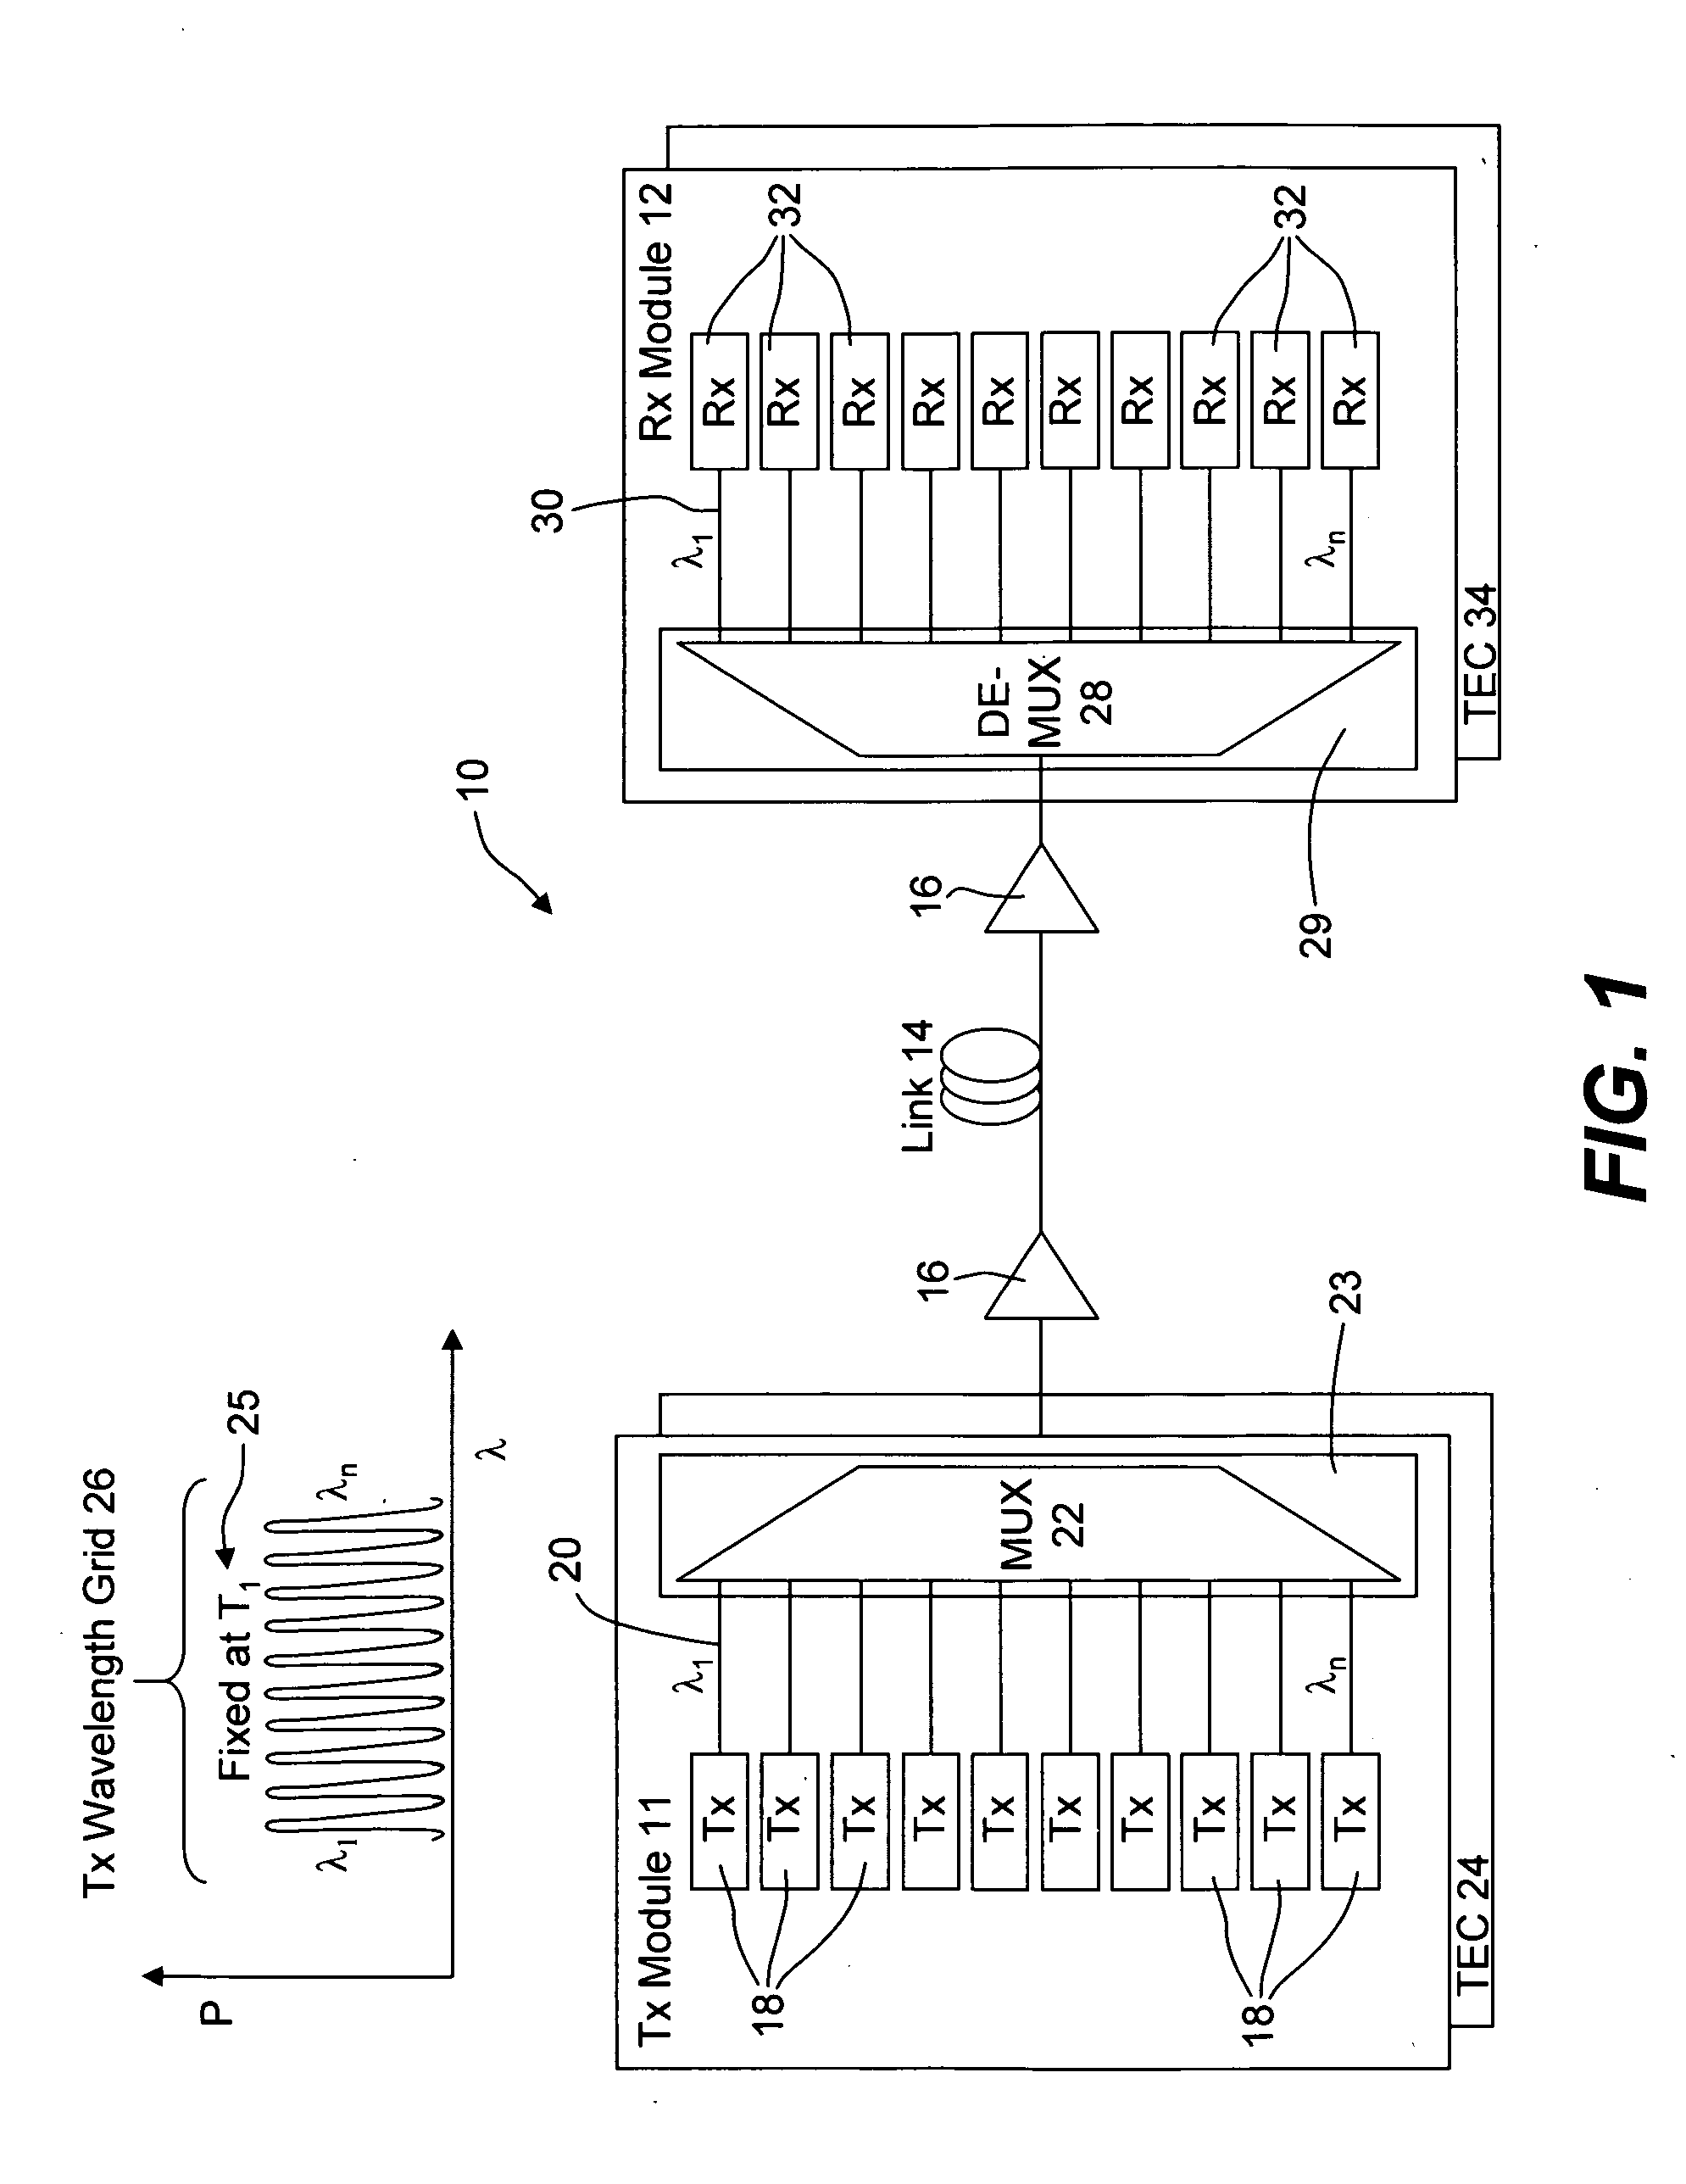 Thermally-floating transmitter wavelength grid of signal channels in a WDM transmission system